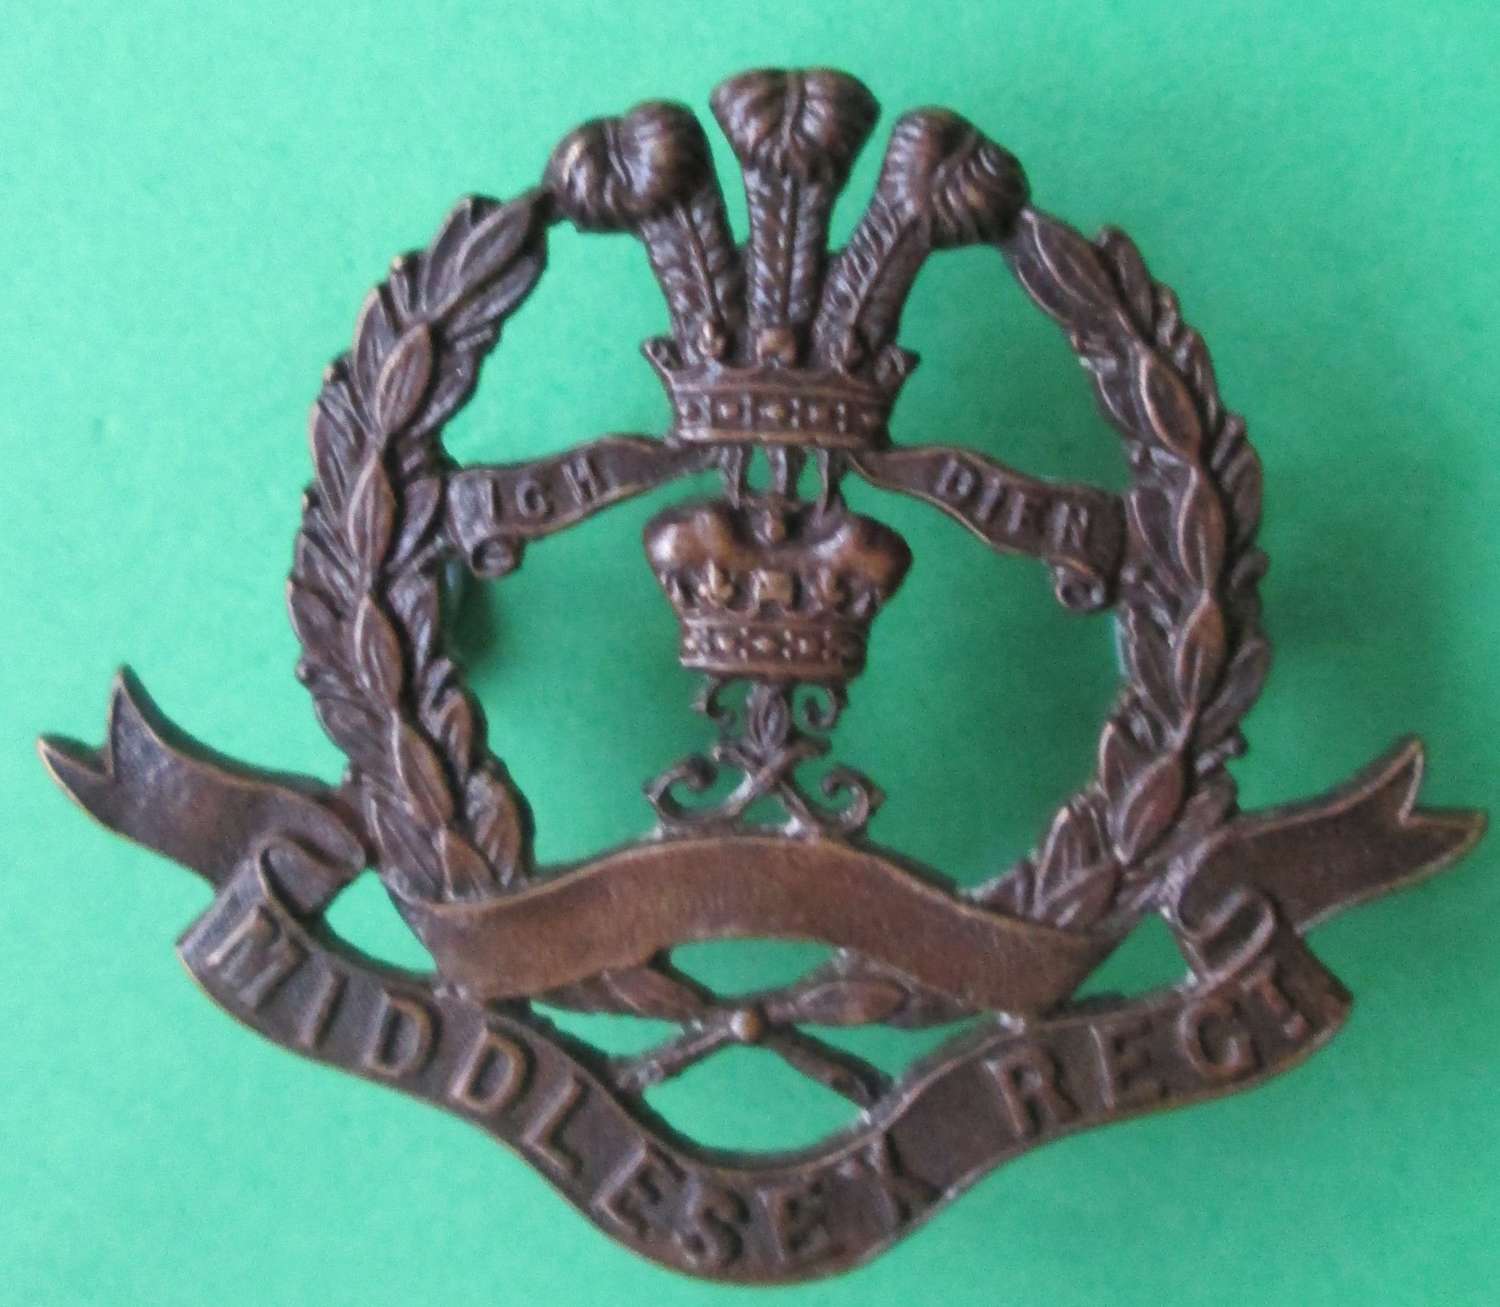 A 10TH MIDDLESEX TERRITORIAL REGT BADGE MADE BY JENNINGS AND CO